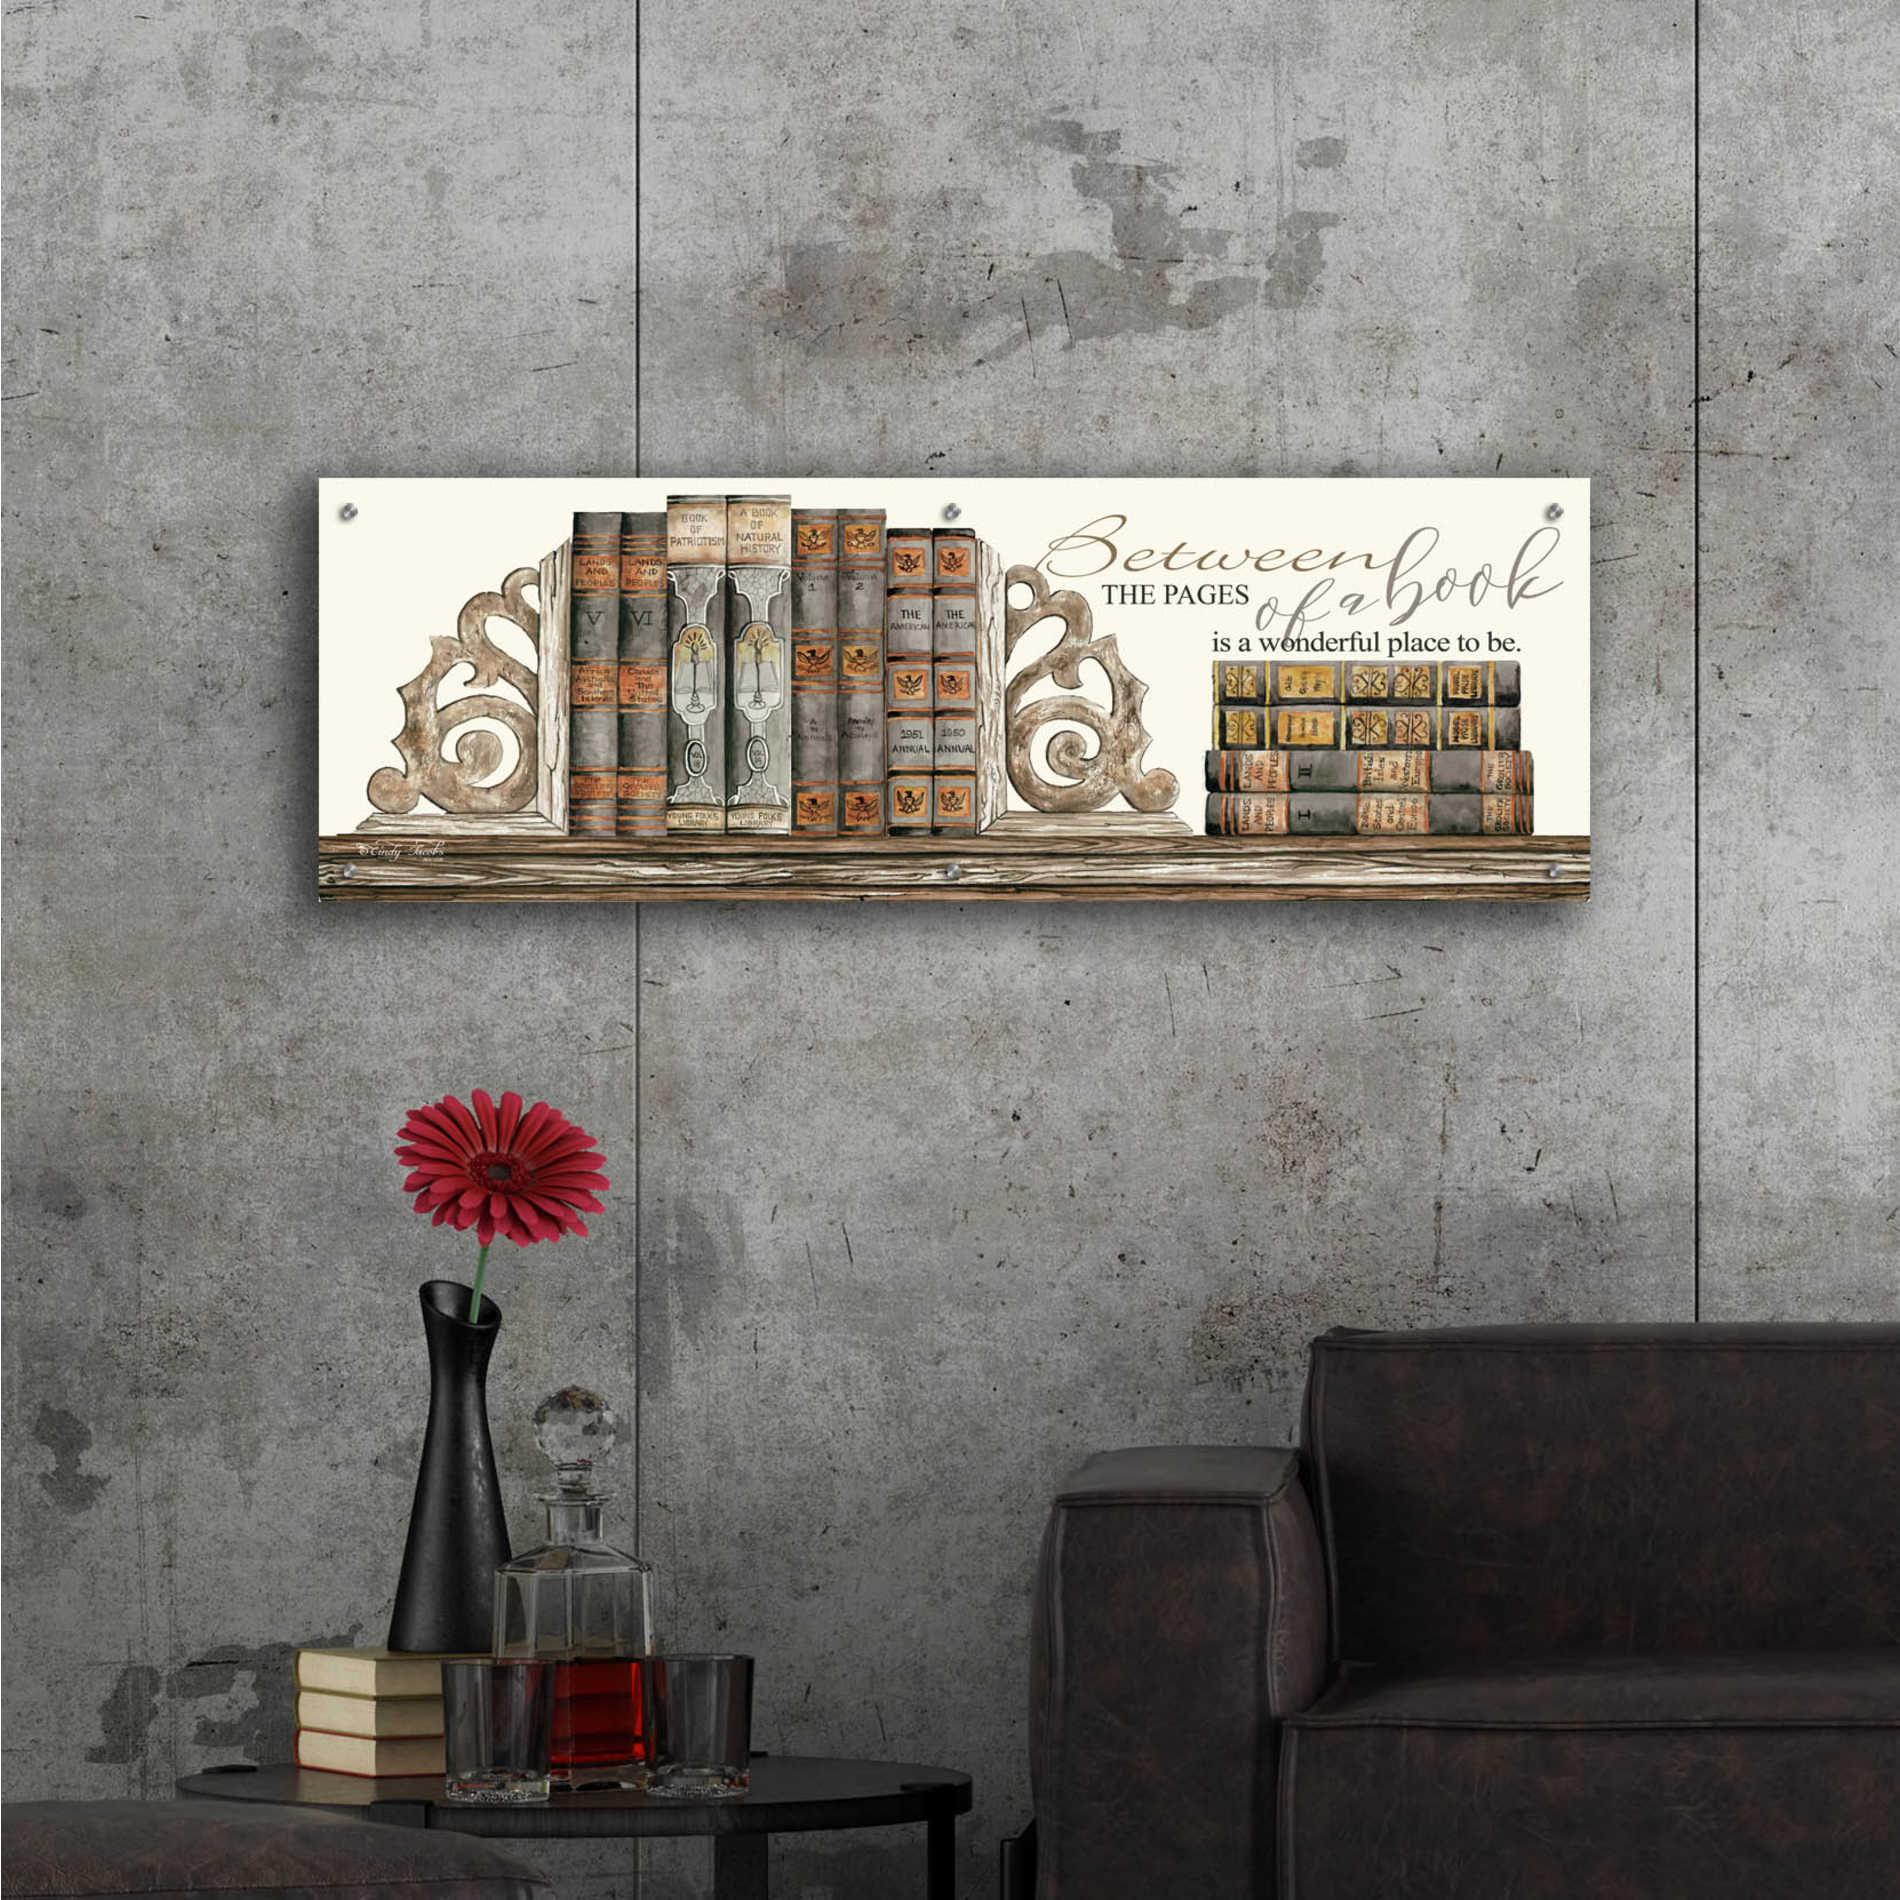 Epic Art 'Between the Pages of a Book' by Cindy Jacobs, Acrylic Glass Wall Art,48x16